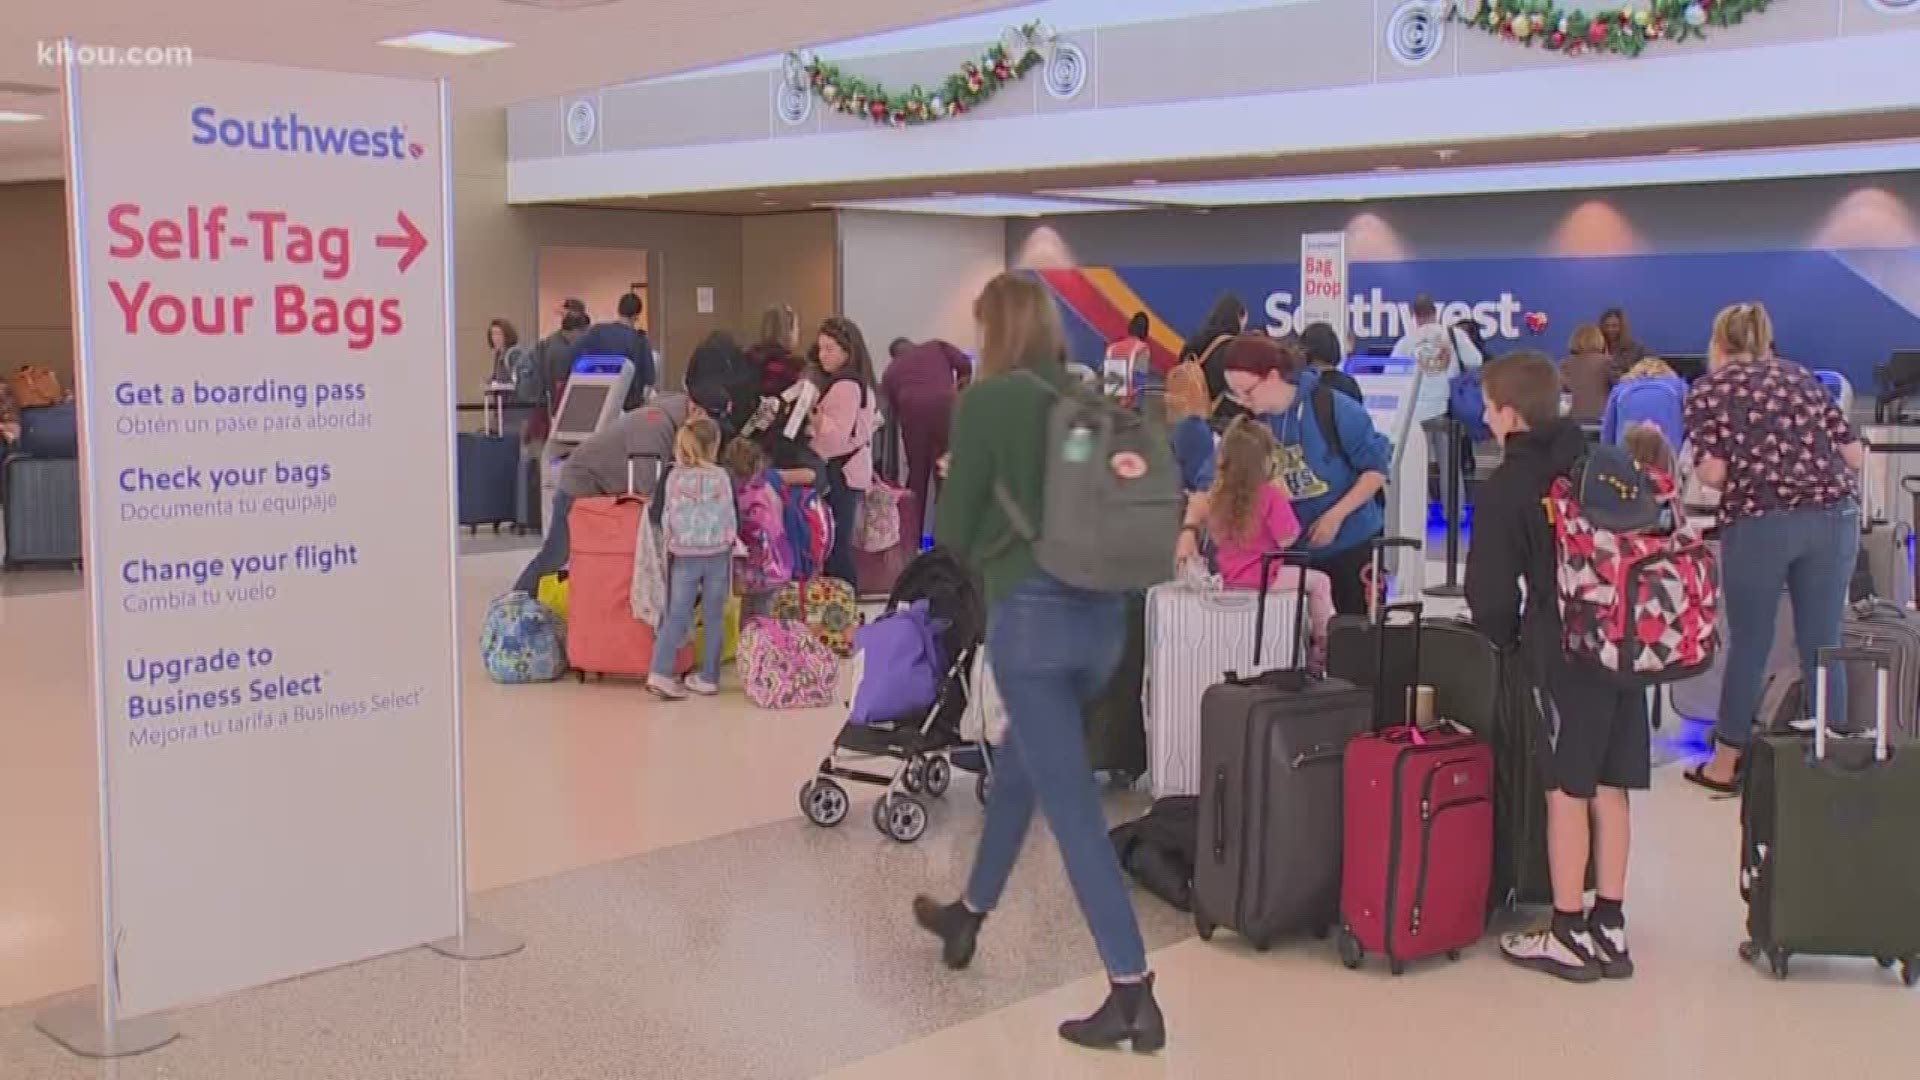 Many Houstonians are getting an early start on one of the busiest travel times of the year.